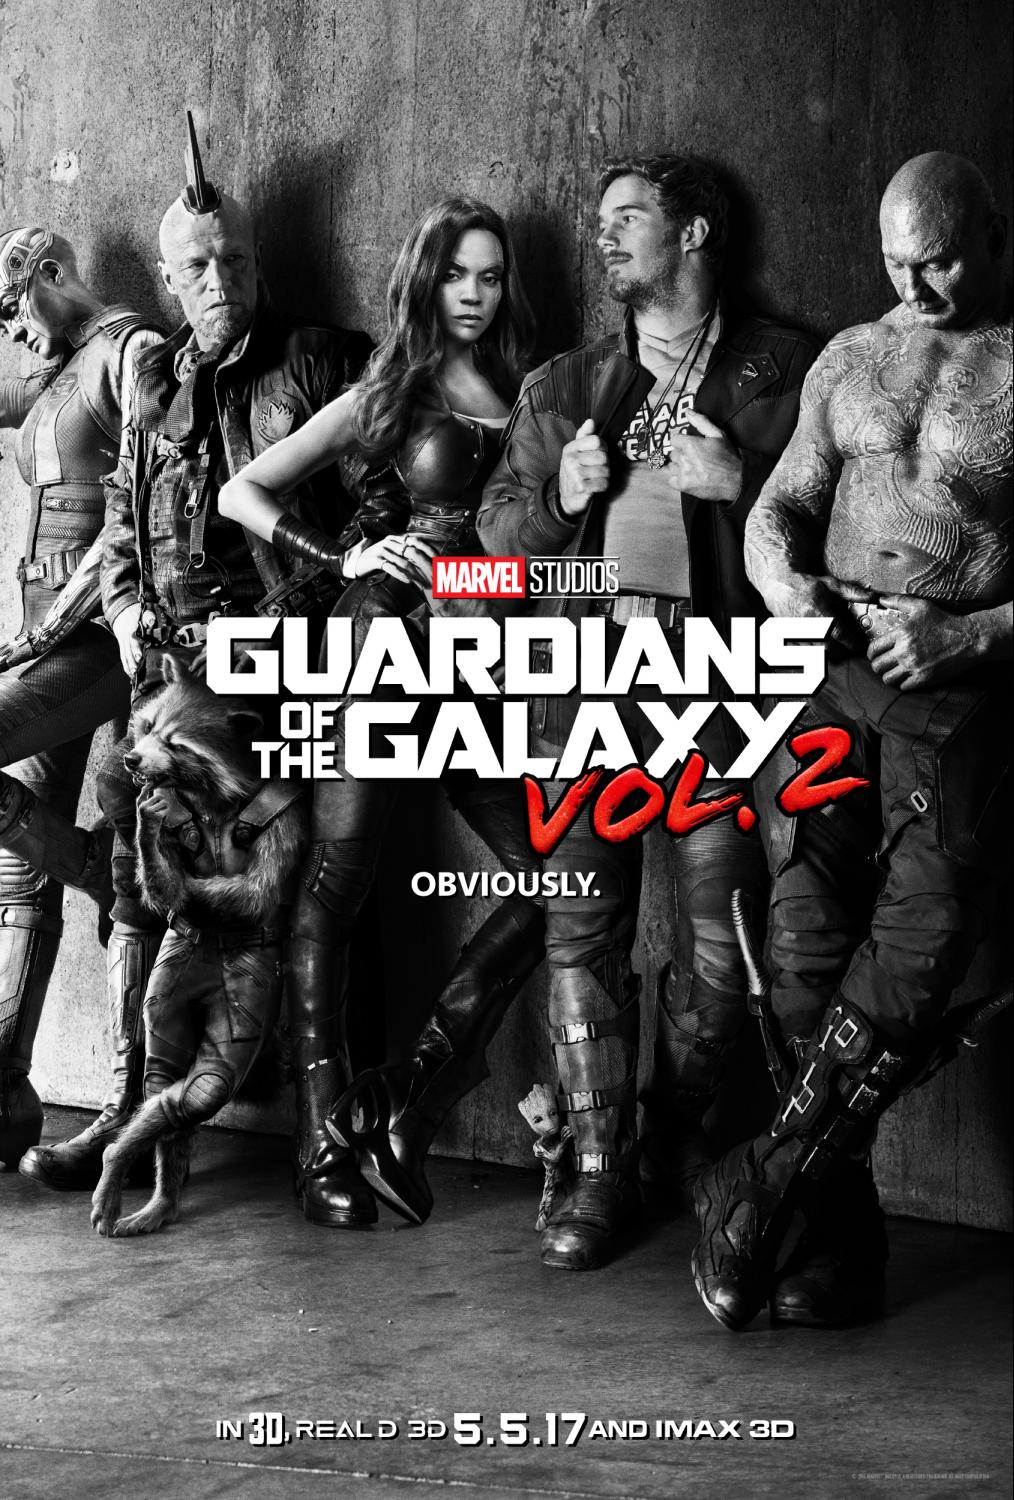 Guardians of the Galaxy Vol. 2 Comes to Theaters May 5, 2017 #GotGVol2